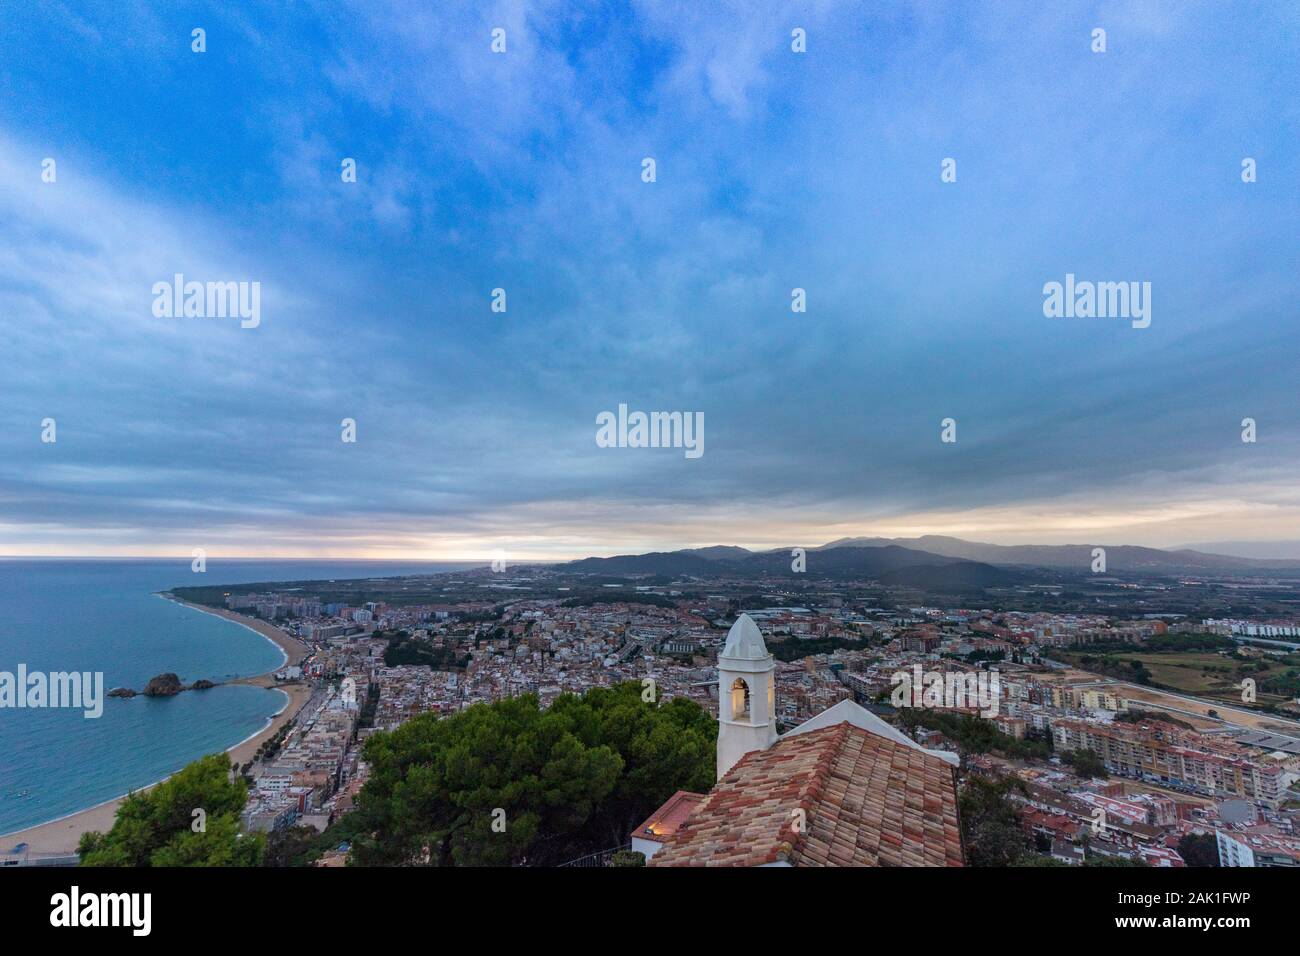 Nice village of Blanes at sunset, with a spectacular sky Stock Photo